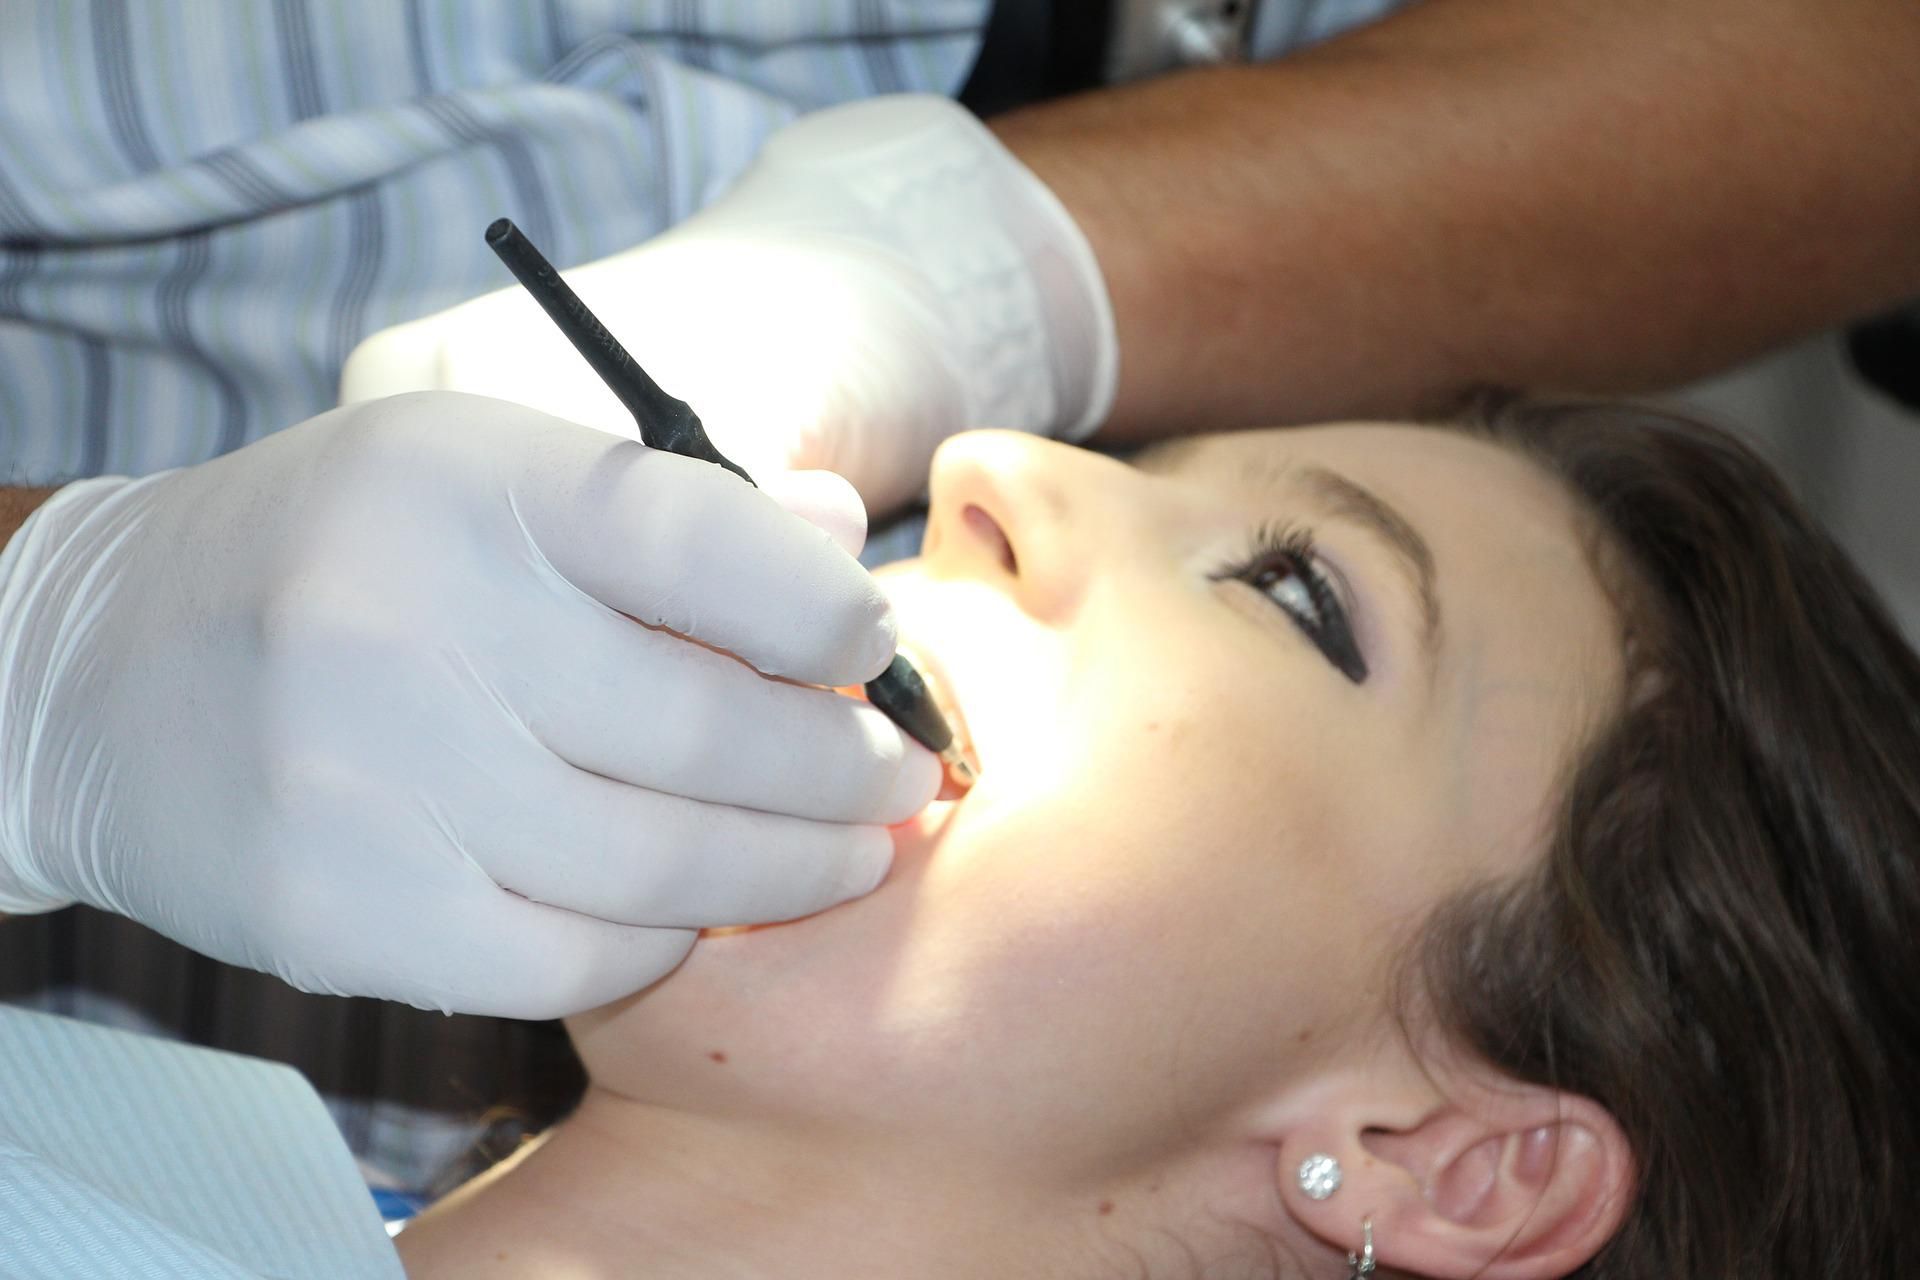 A dentist requires a vast range of dental instruments for completing the procedures.